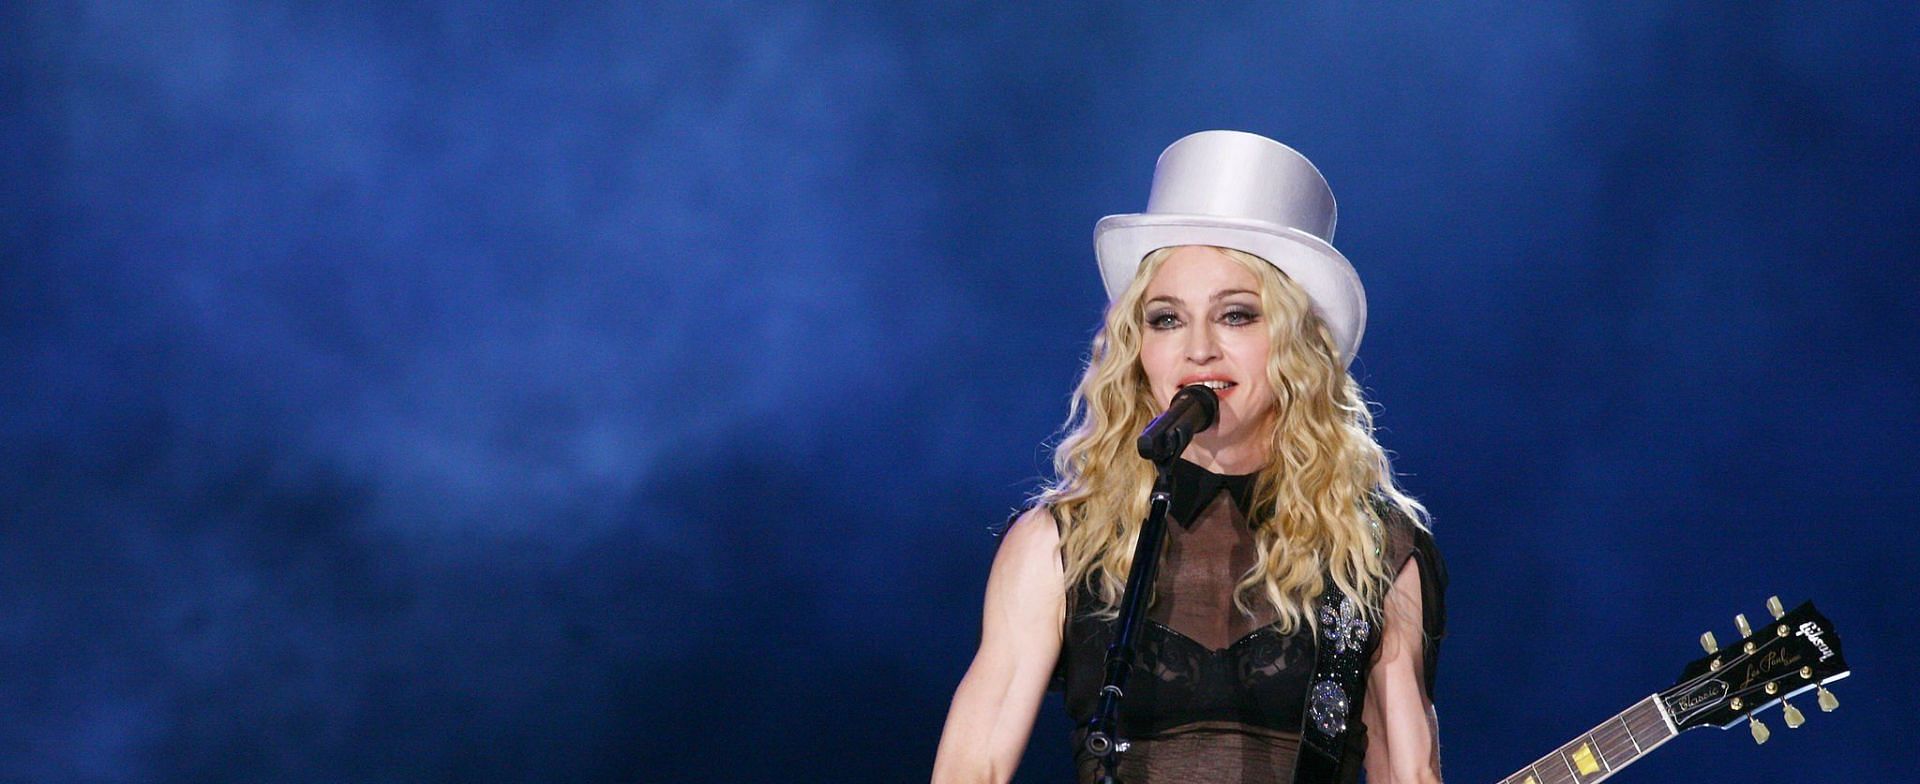 Madonna is seen giving birth to a tree in a bizarre NFT collection video (Image via Elisabetta Villa/Getty Images)